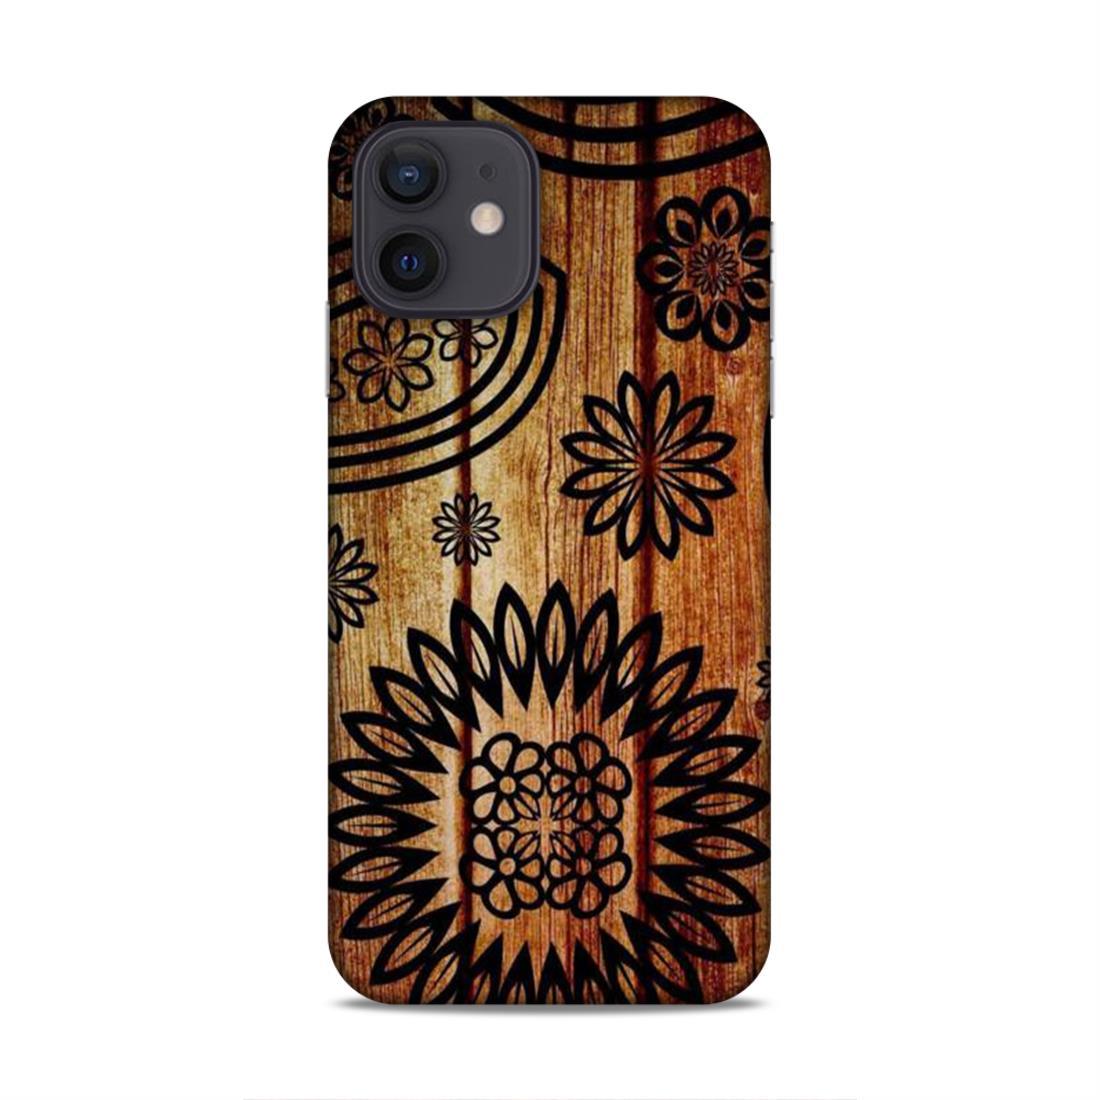 Wooden Look Pattern iPhone 12 Mobile Case Cover